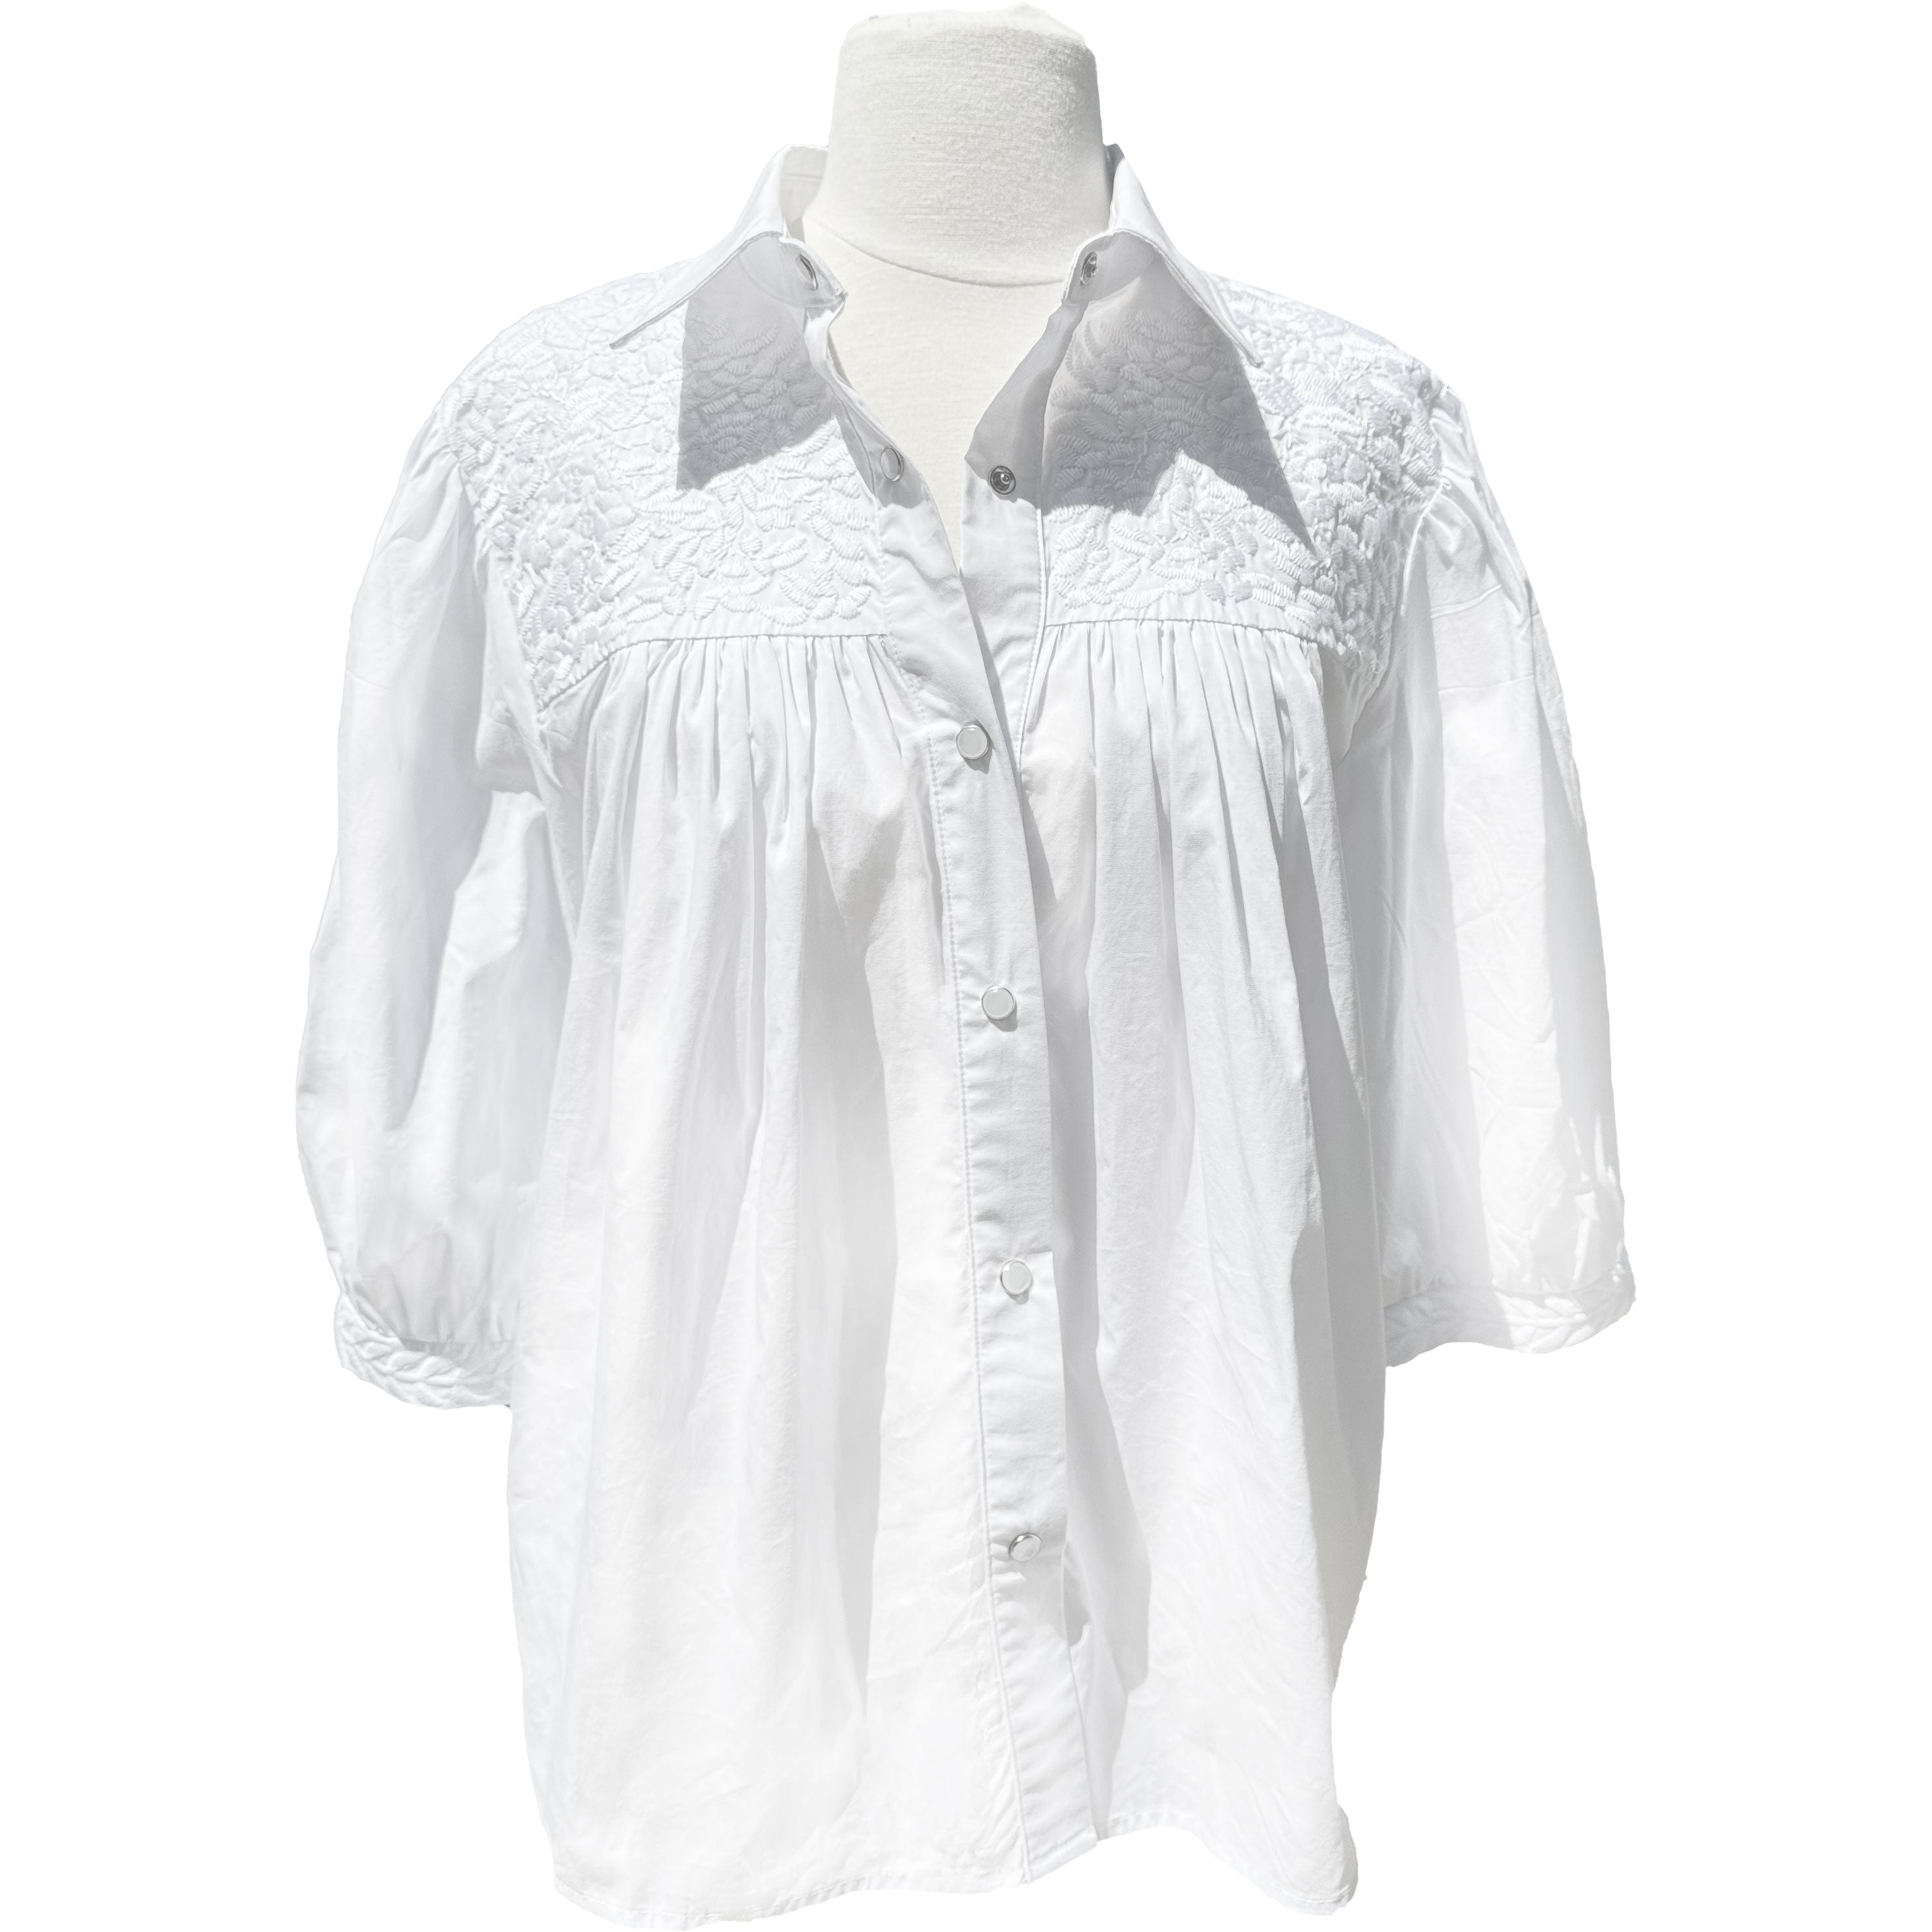 PRE-ORDER: Double White Cowgirl Blouse (early-June ship date)